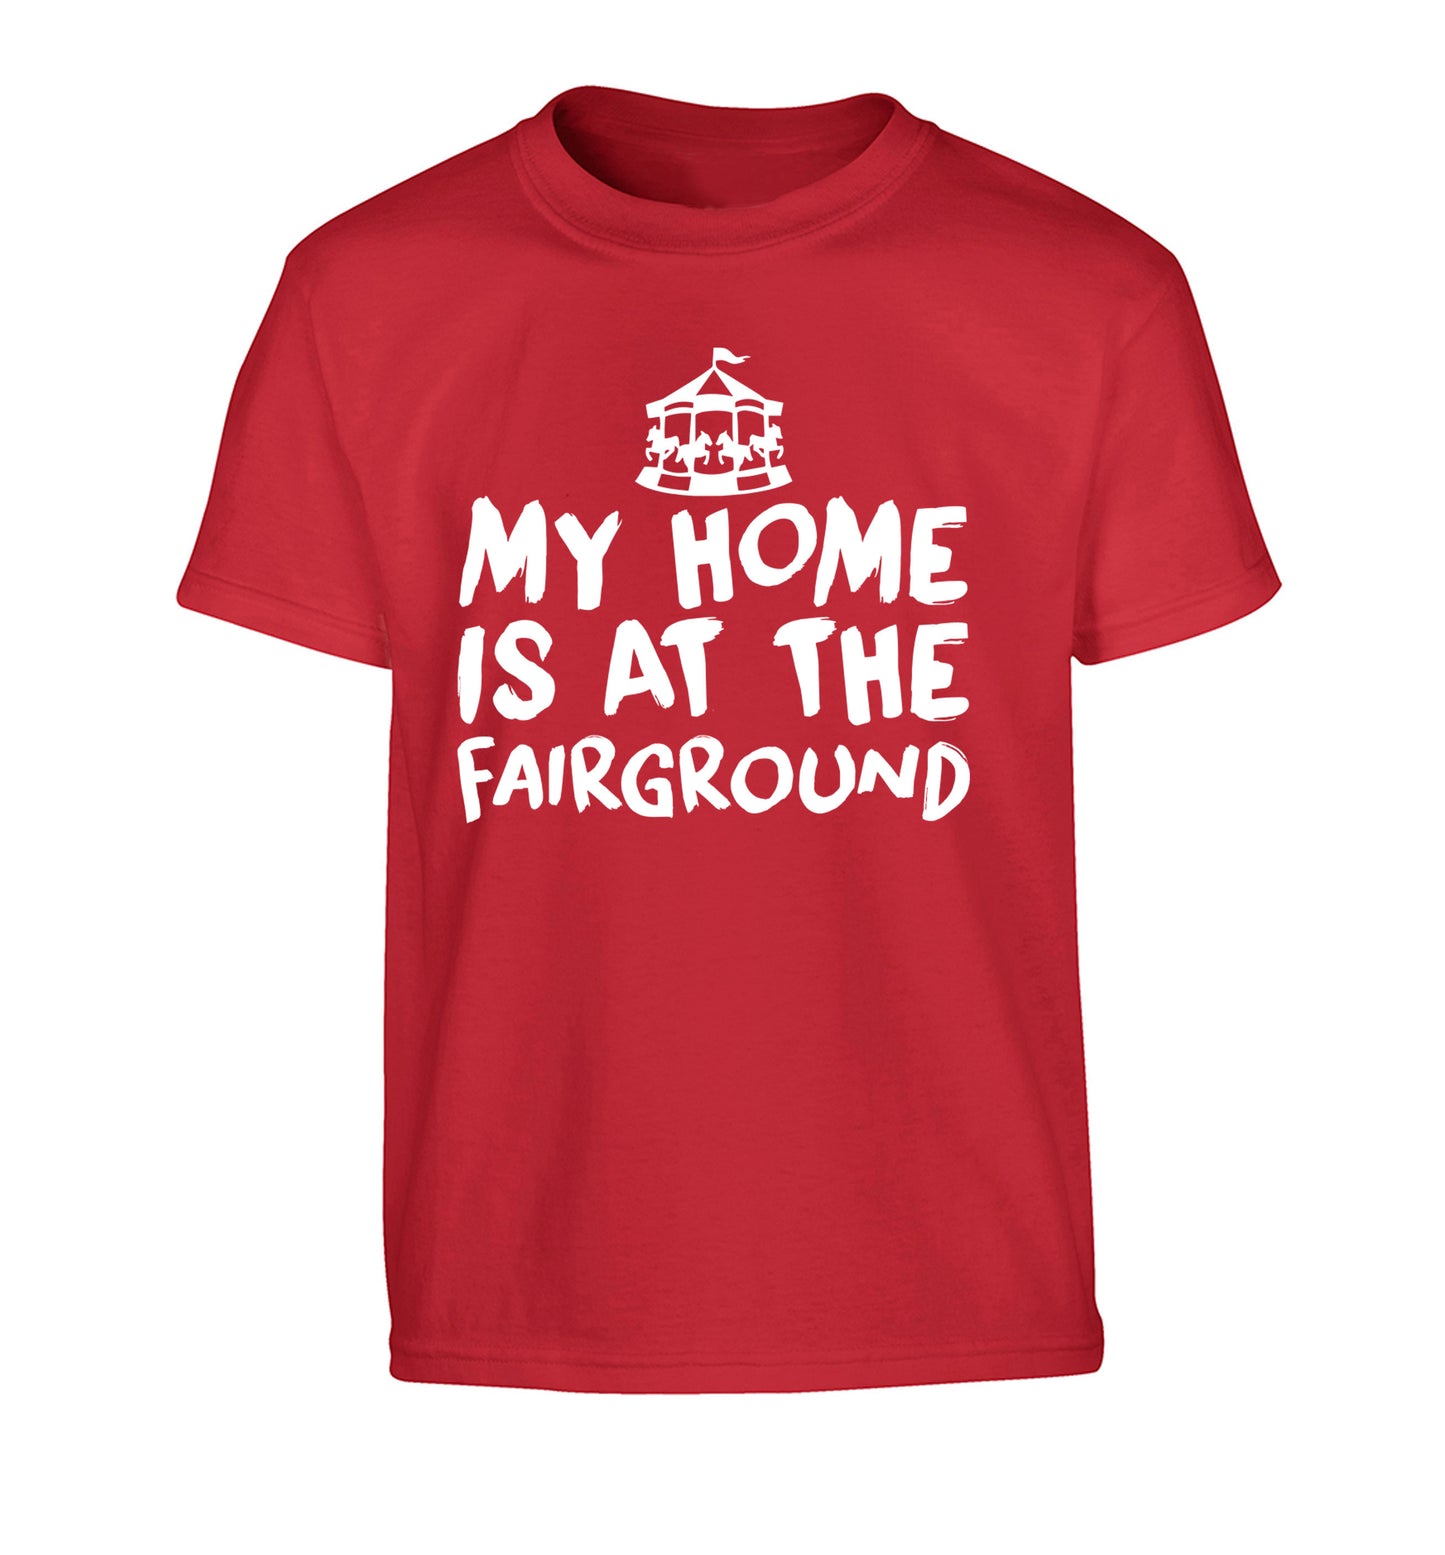 My home is at the fairground Children's red Tshirt 12-14 Years